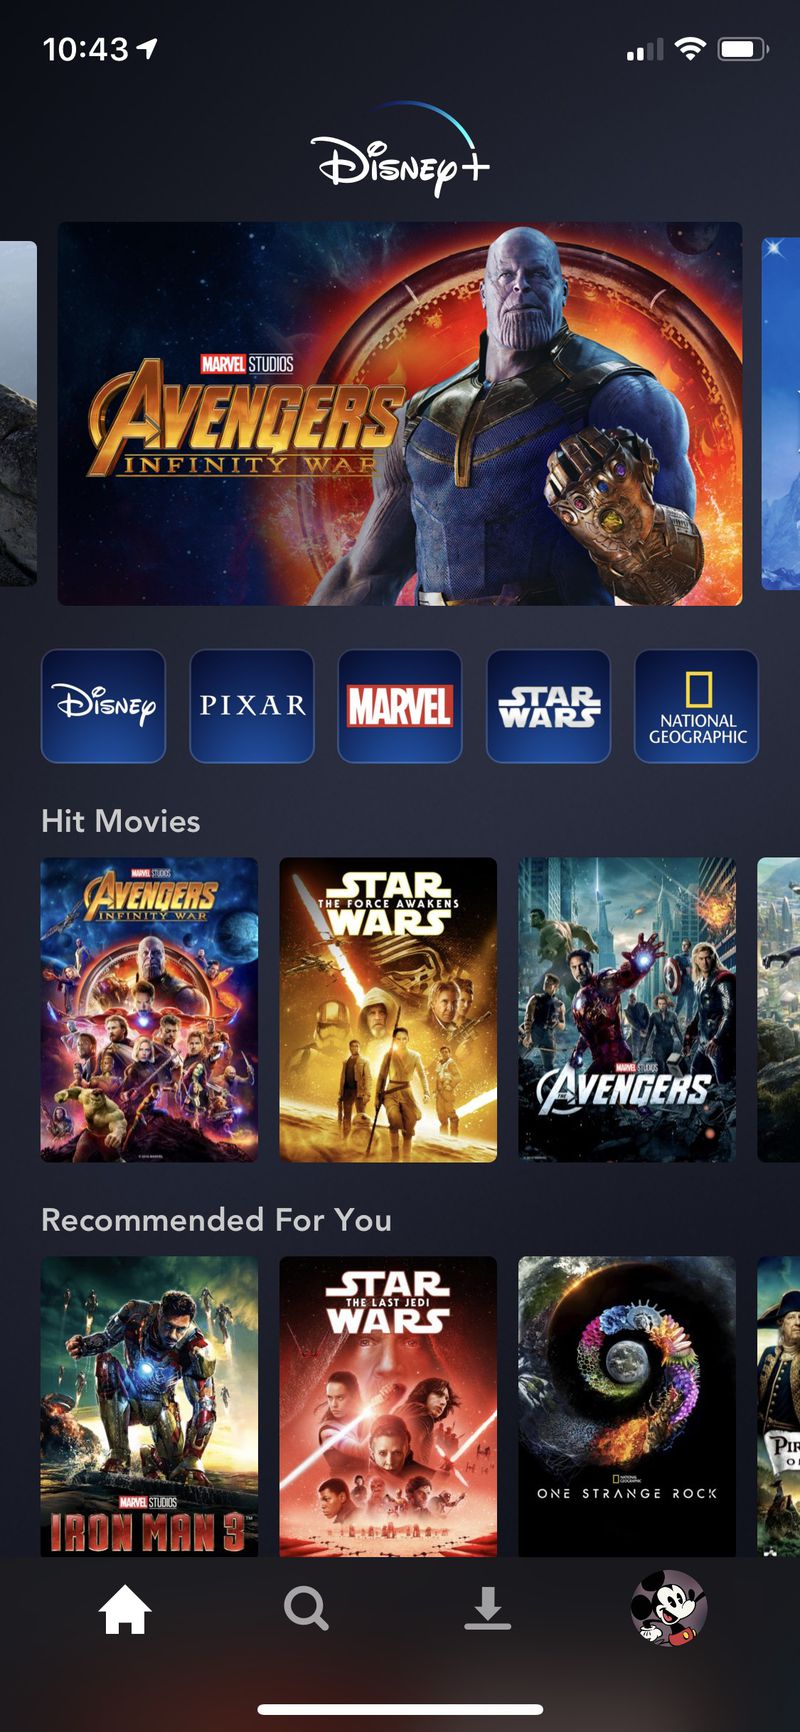 Disney Plus Android app home screen